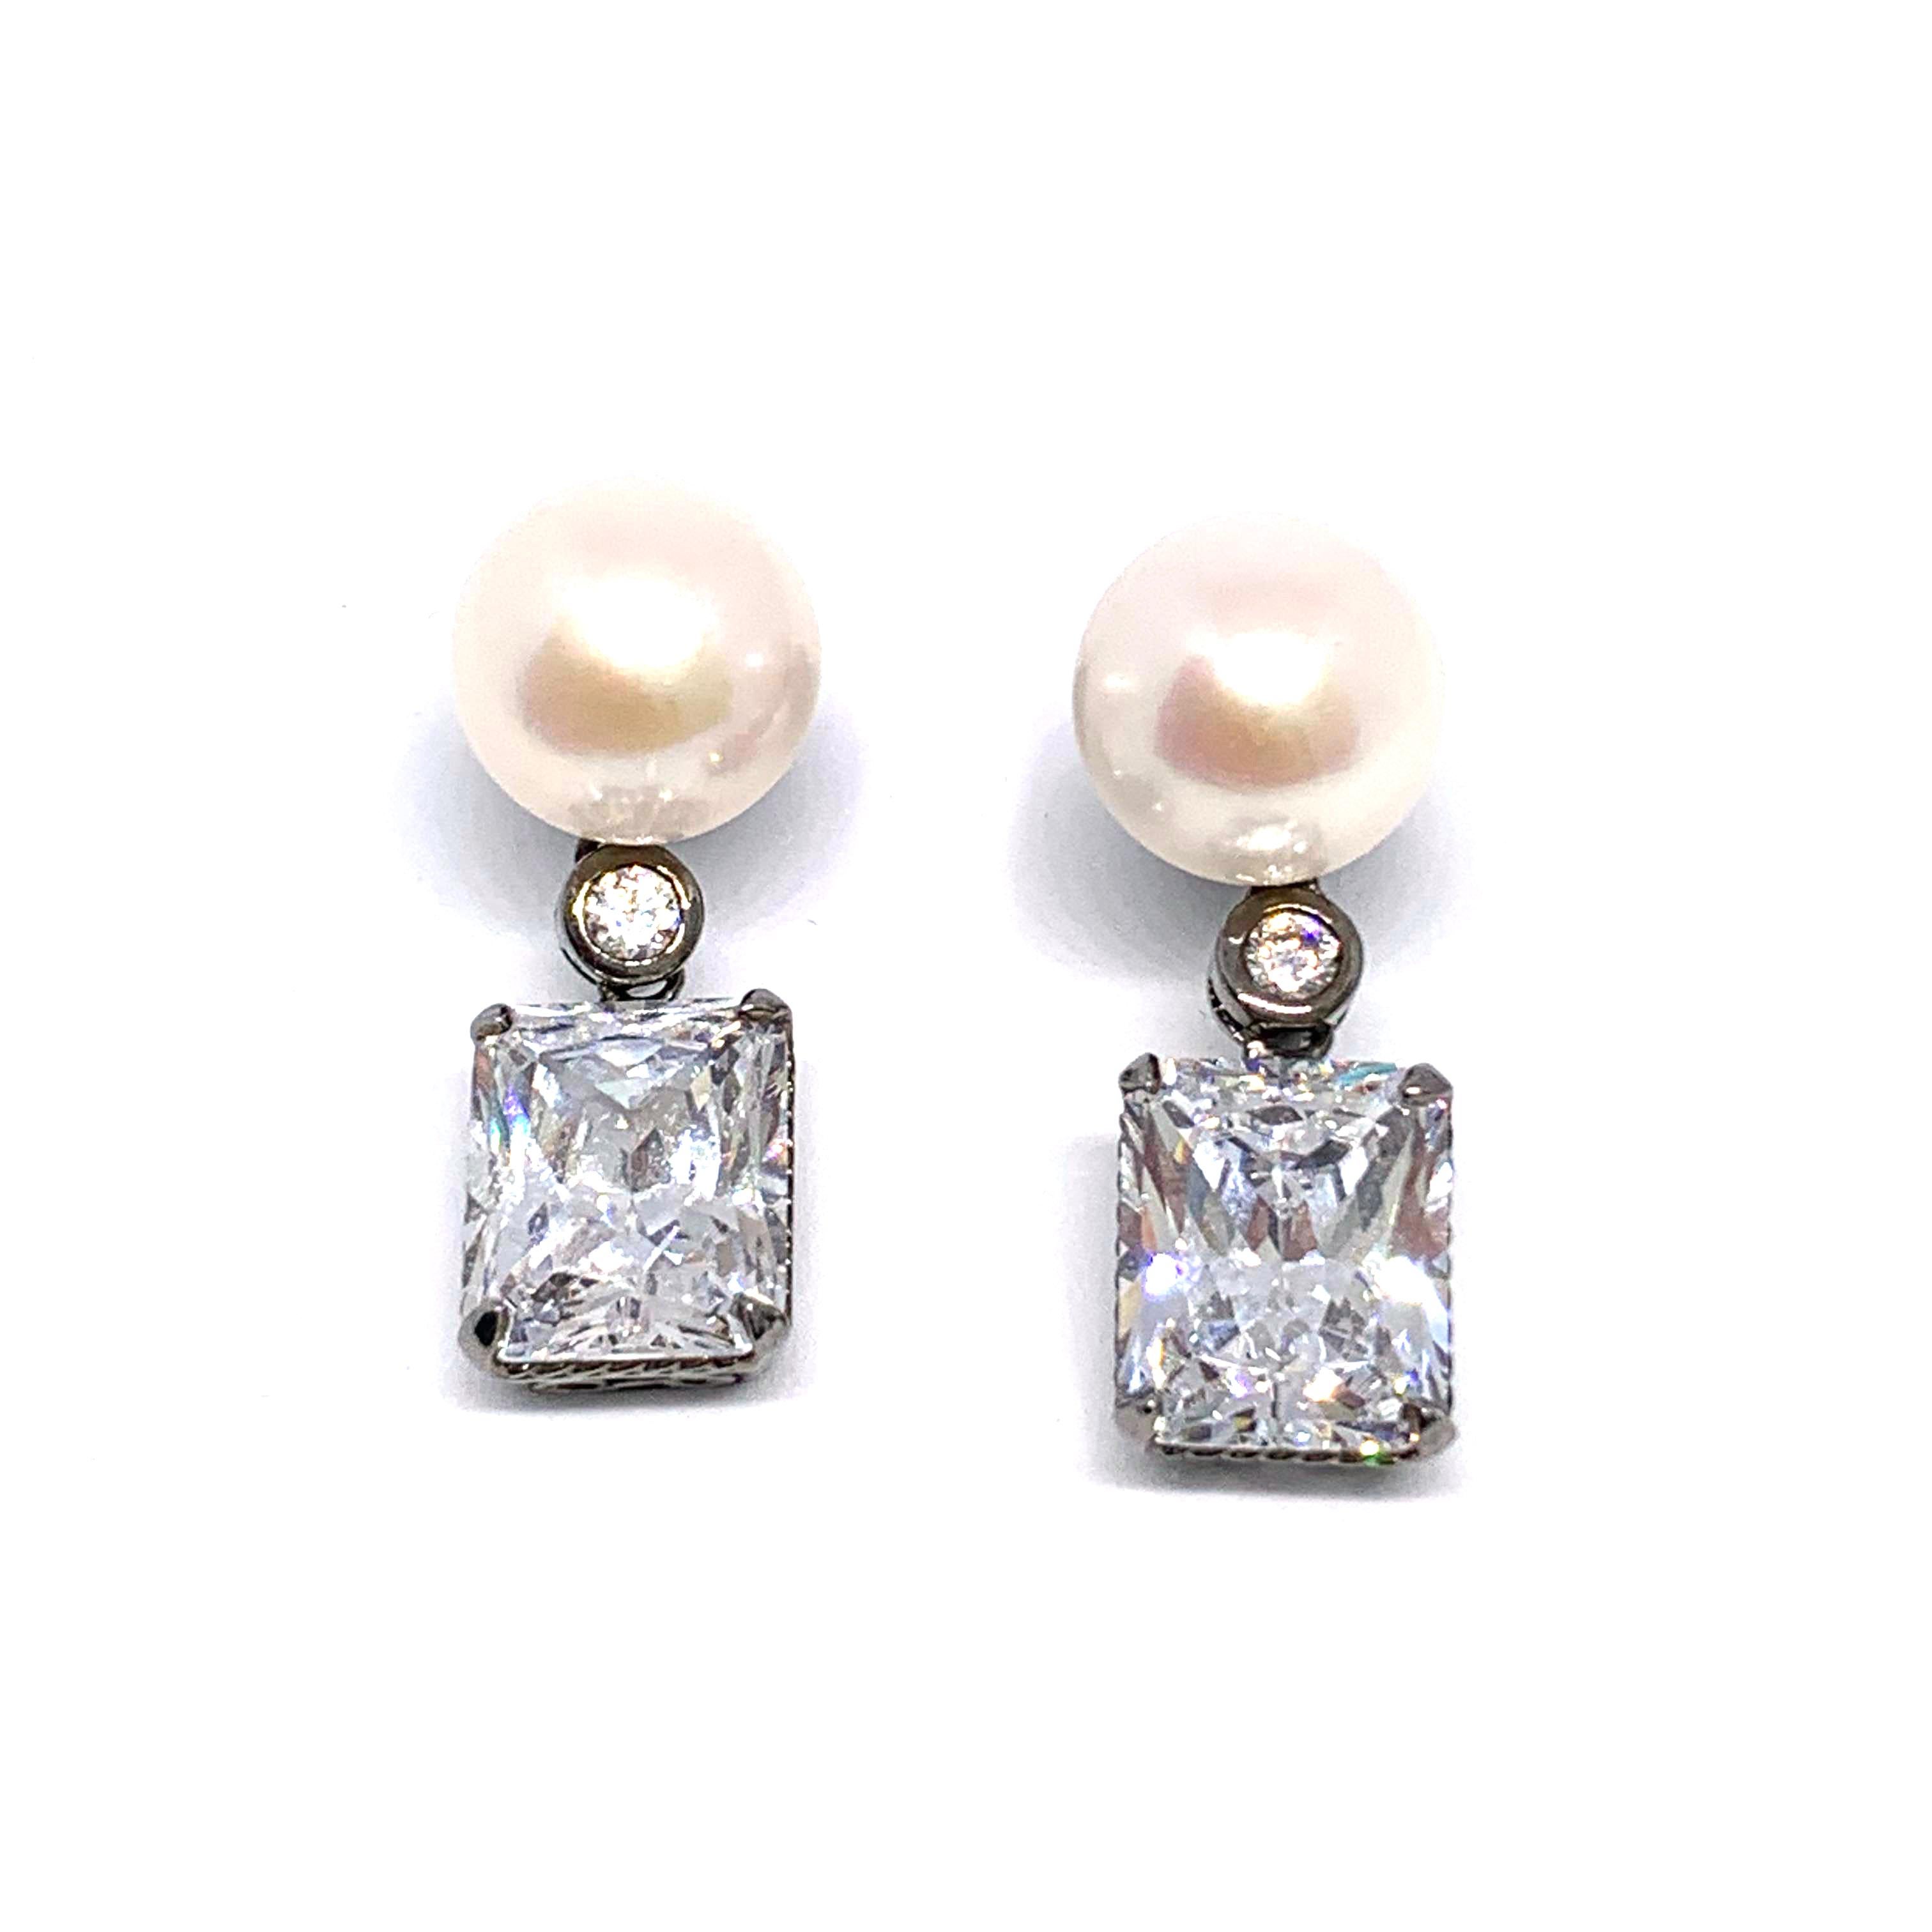 Round Cut 11mm Cultured Pearl and 4ct Simulated Diamond Drop Earrings